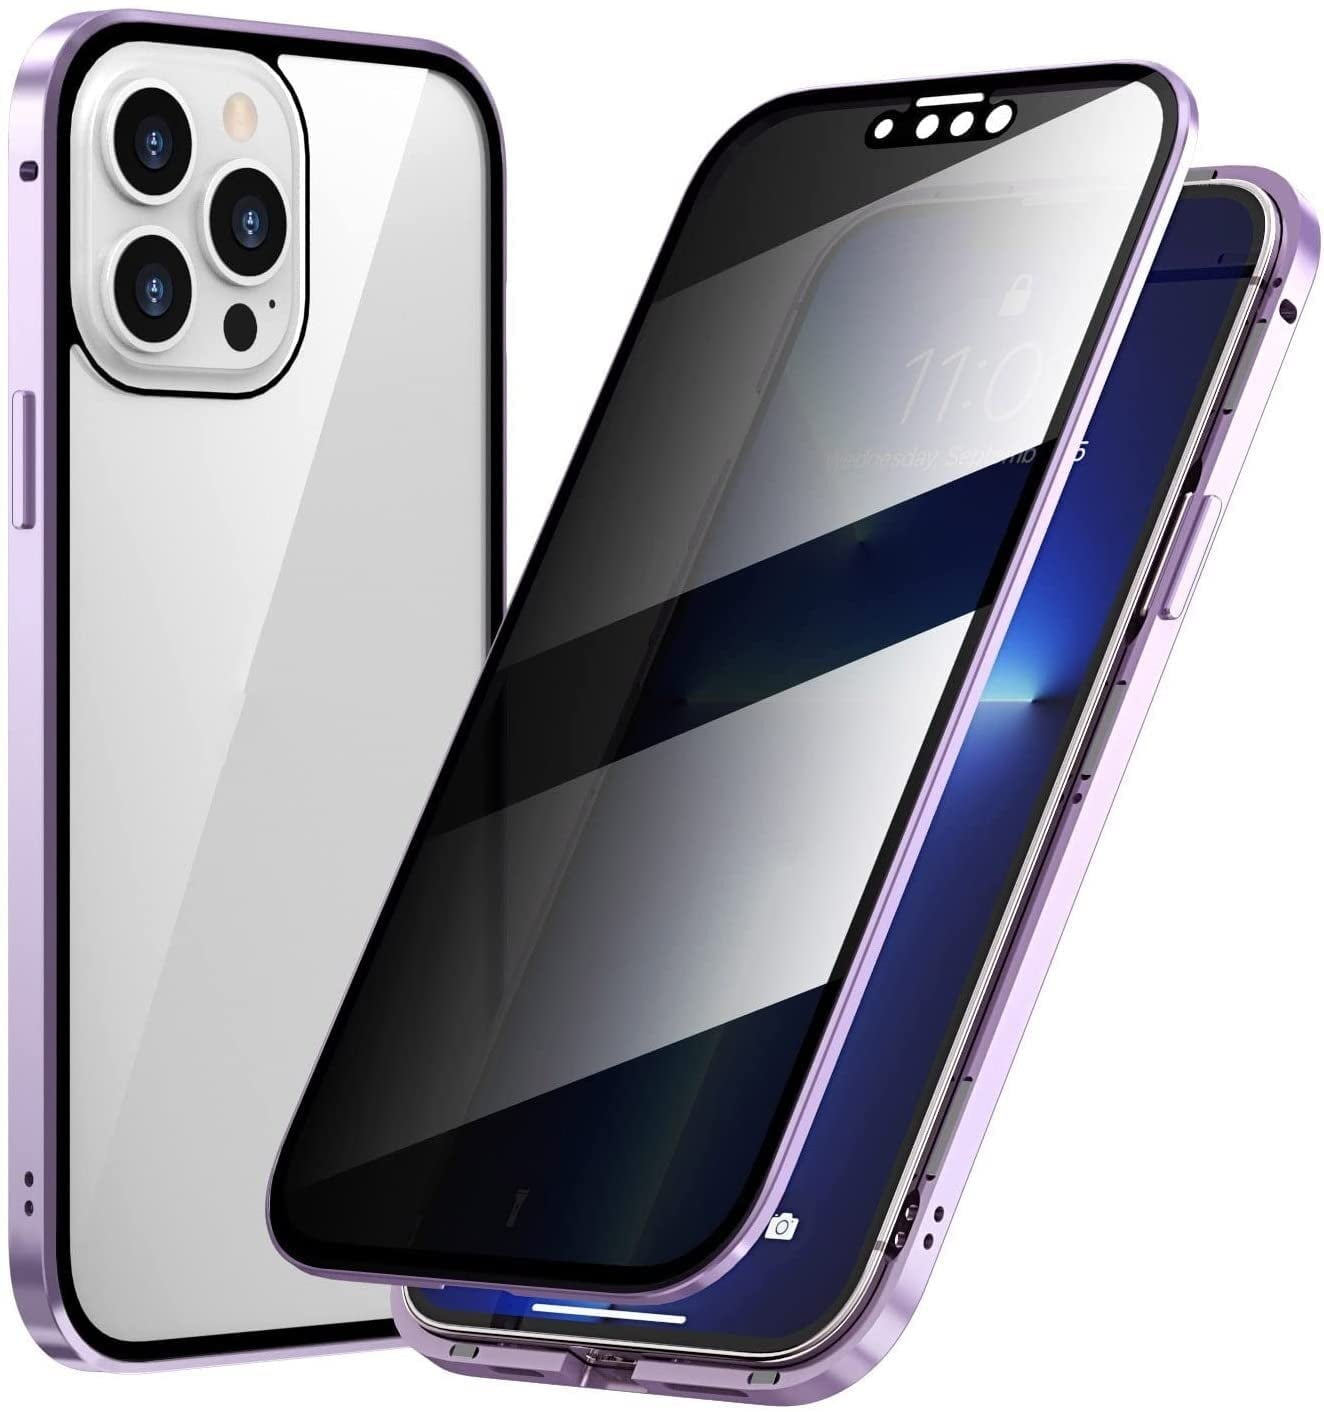 Privacy Magnetic Case, Double Sided Design Tempered Glass with Metal Bumper 360° Full Protective Phone Cover for iPhone 13 Pro Max/iPhone 11/ iPhone XR Walmart.com